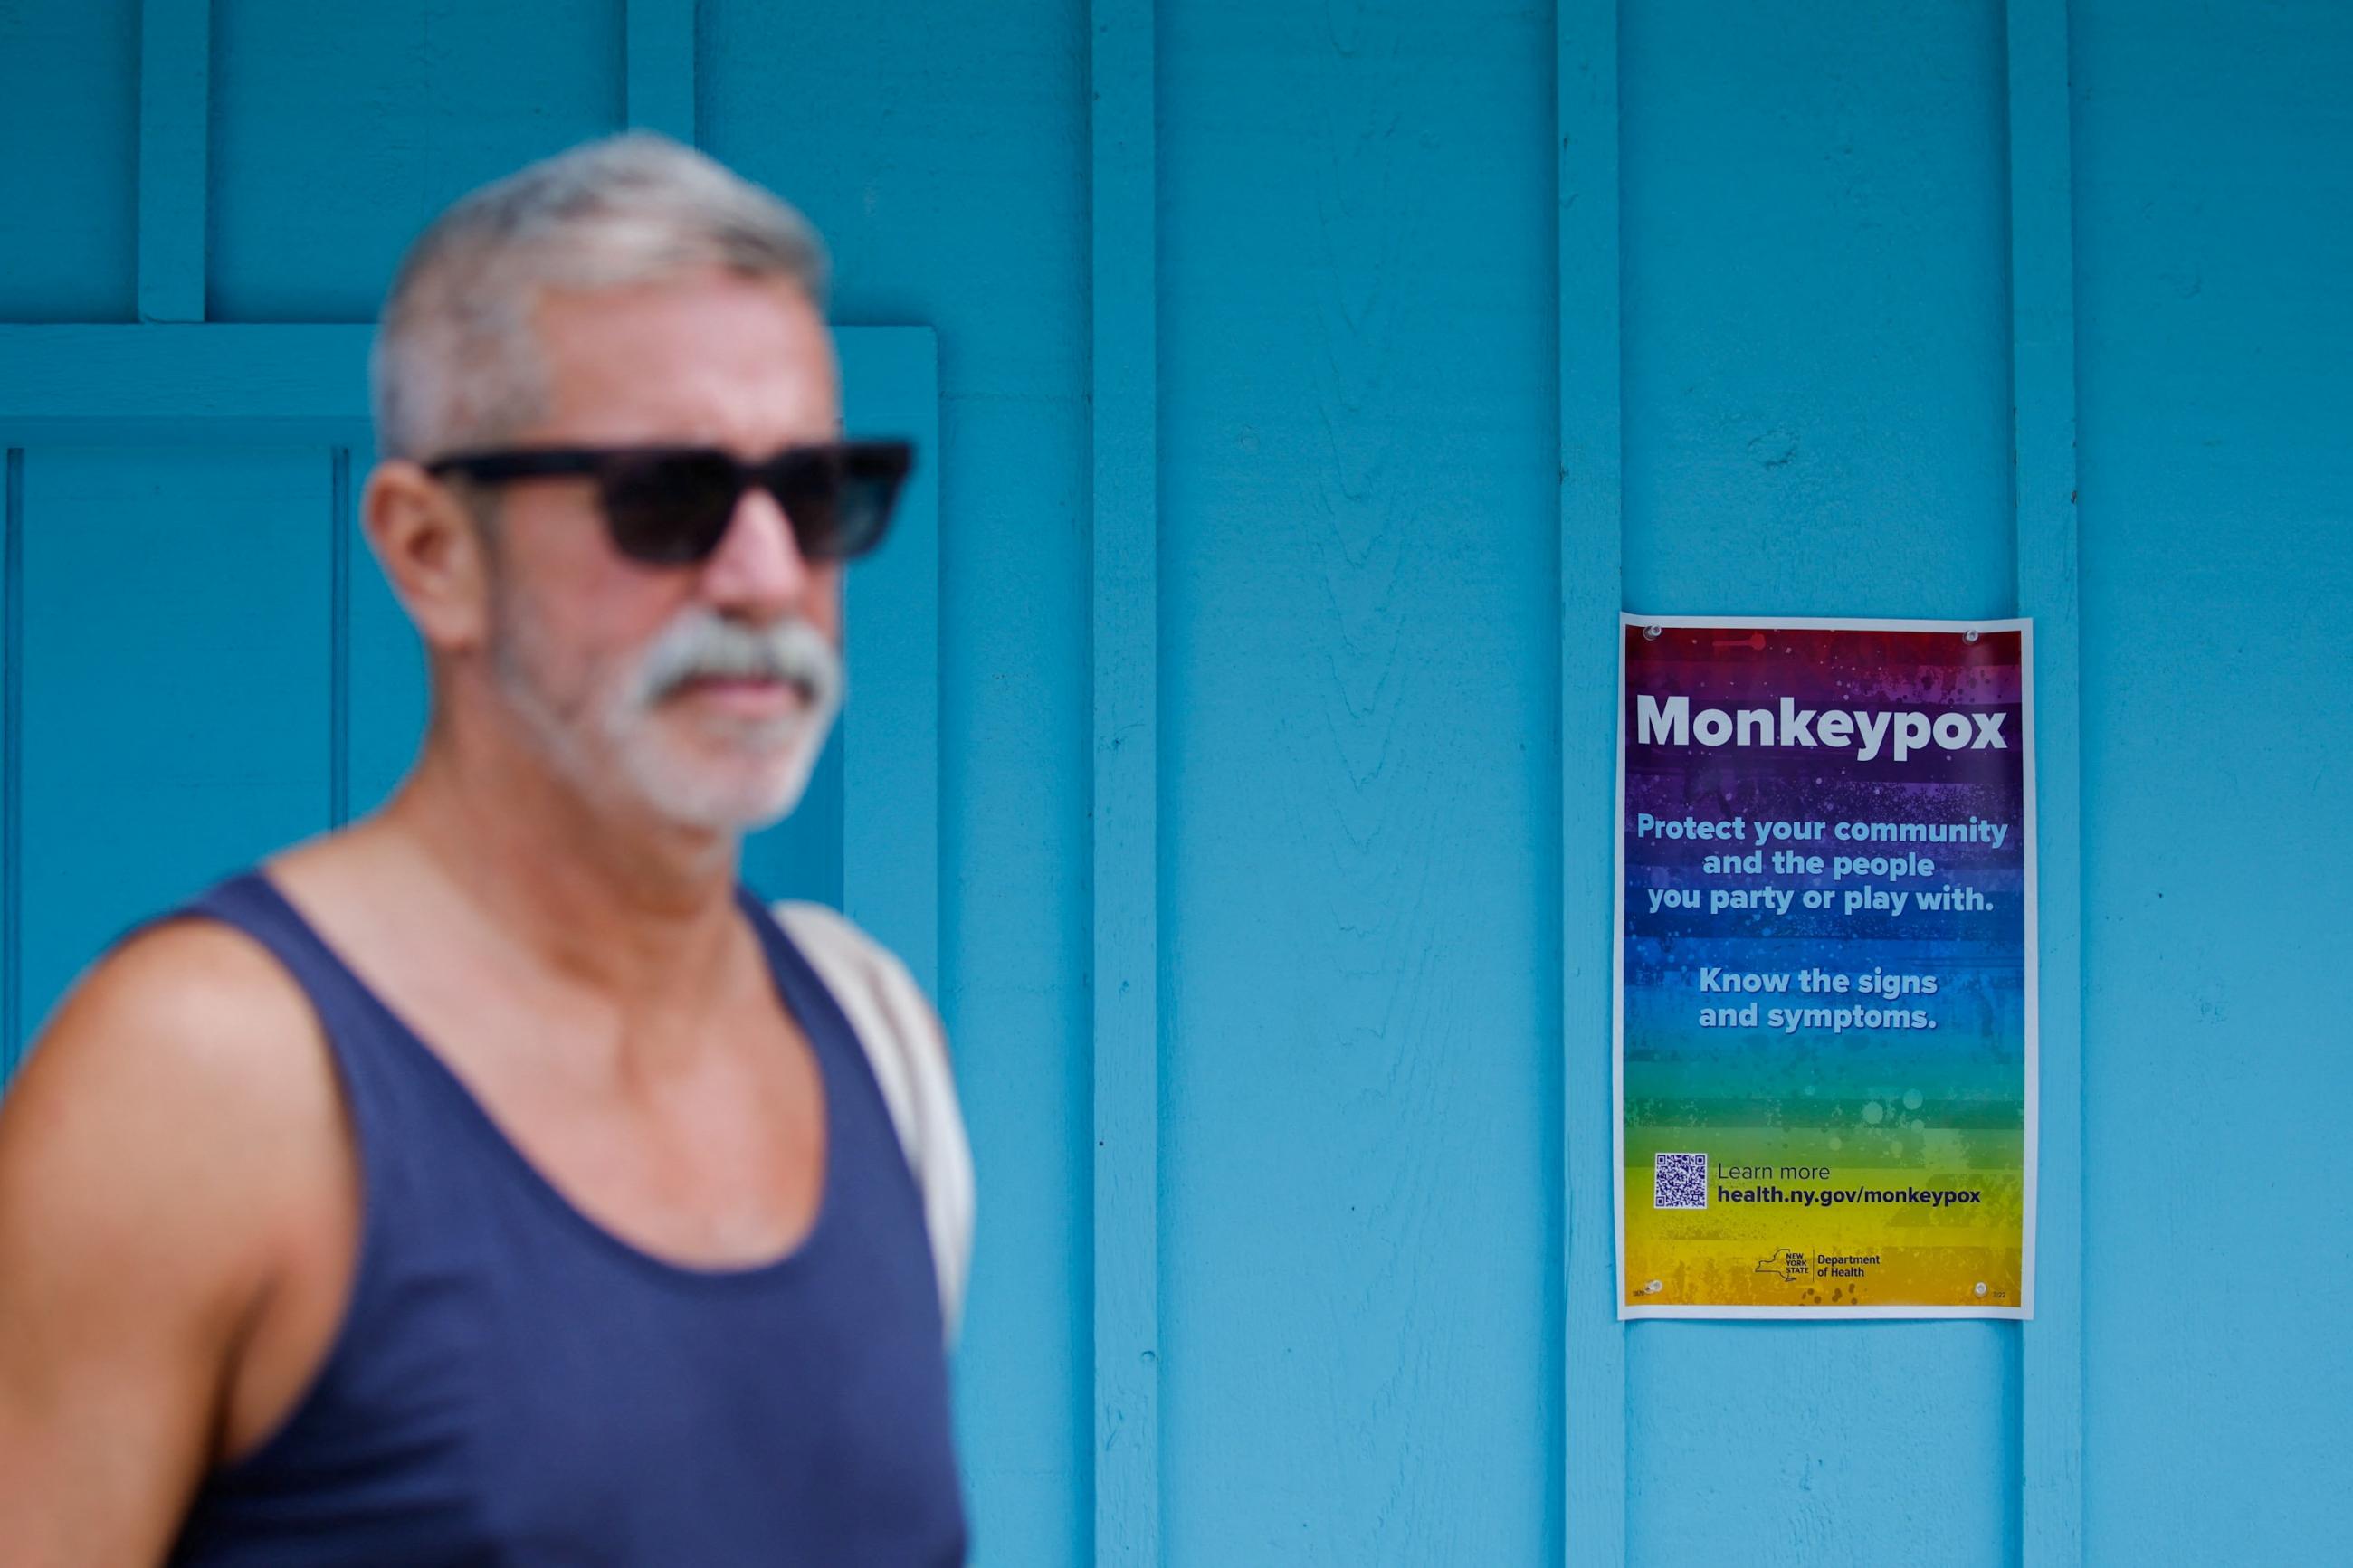 A grey-haired bearded man in a blue tank top and sunglasses walks past a turquoise wall with a rainbow poster that reads "Protect your community and the people you party or play with. Know the signs and symptoms" placed there by the New York Department of Health